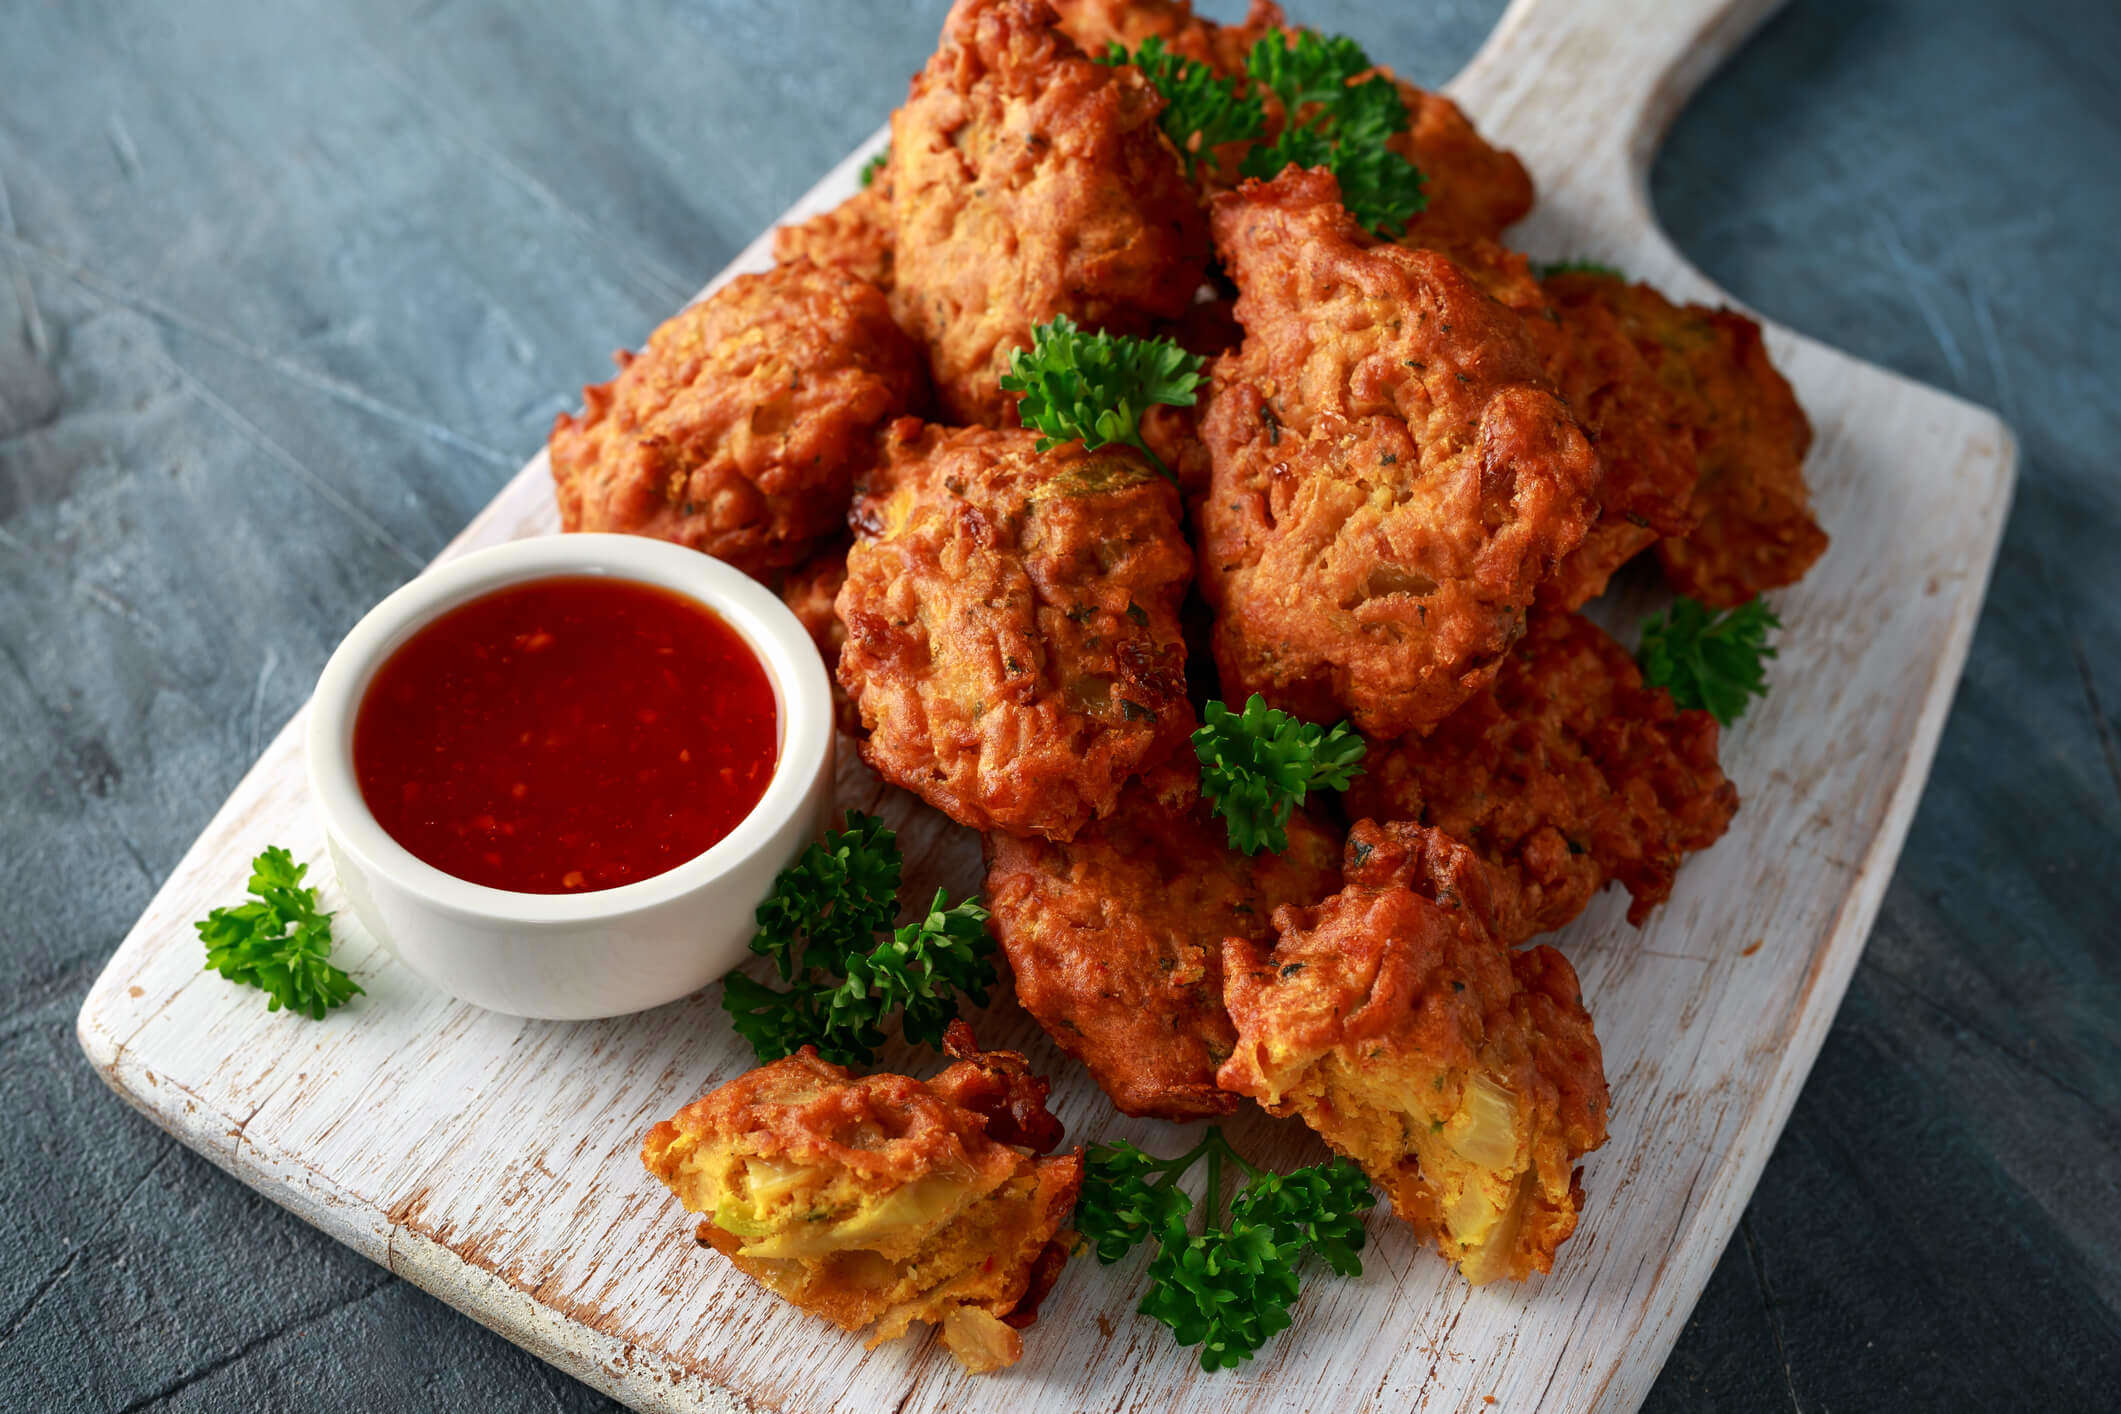 a stack of vegetable pakoras on a wooden board with chilli dipping sauce garnished with green herbs